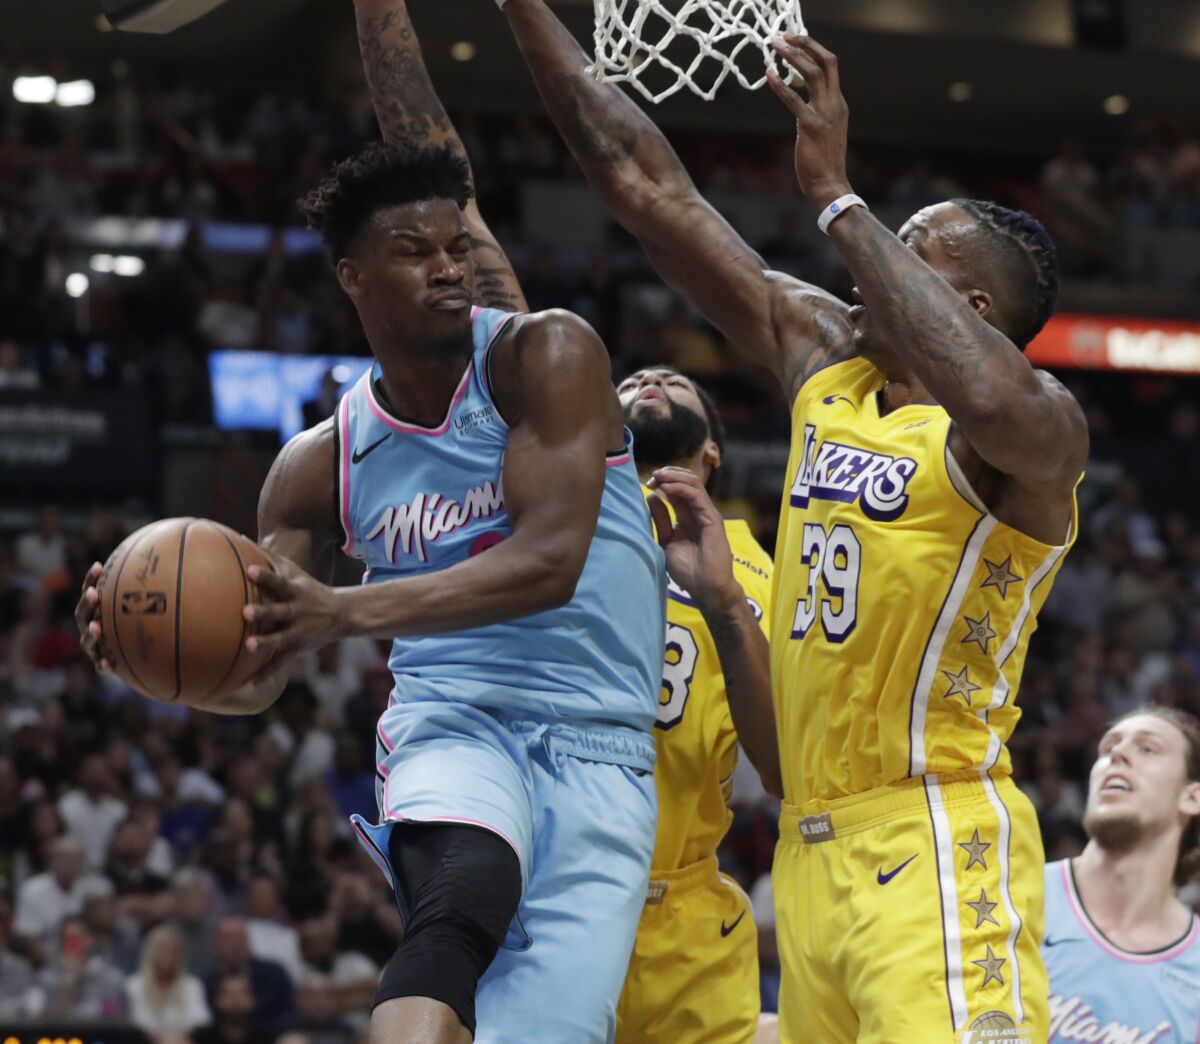 The Heat's Jimmy Butler looks to pass against Lakers defenders Dwight Howard (39) and Anthony Davis during a game Dec. 13.